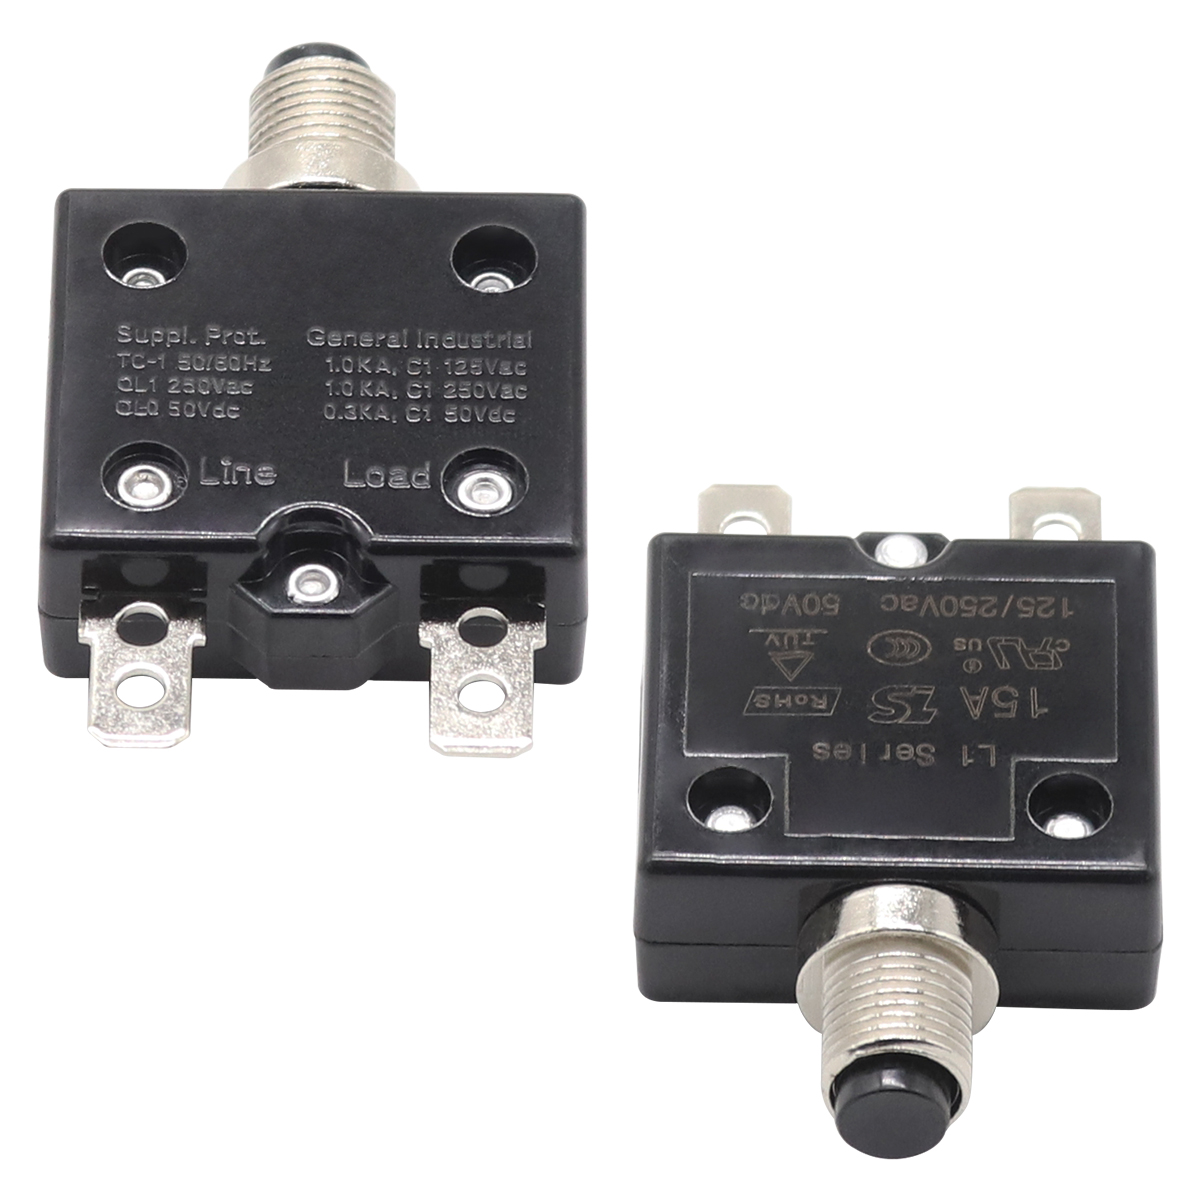 Amomd Push Button Marine RV Current Overload Protector 5 in a Pack 5A 8A 10A 15A 20A 25A 30A